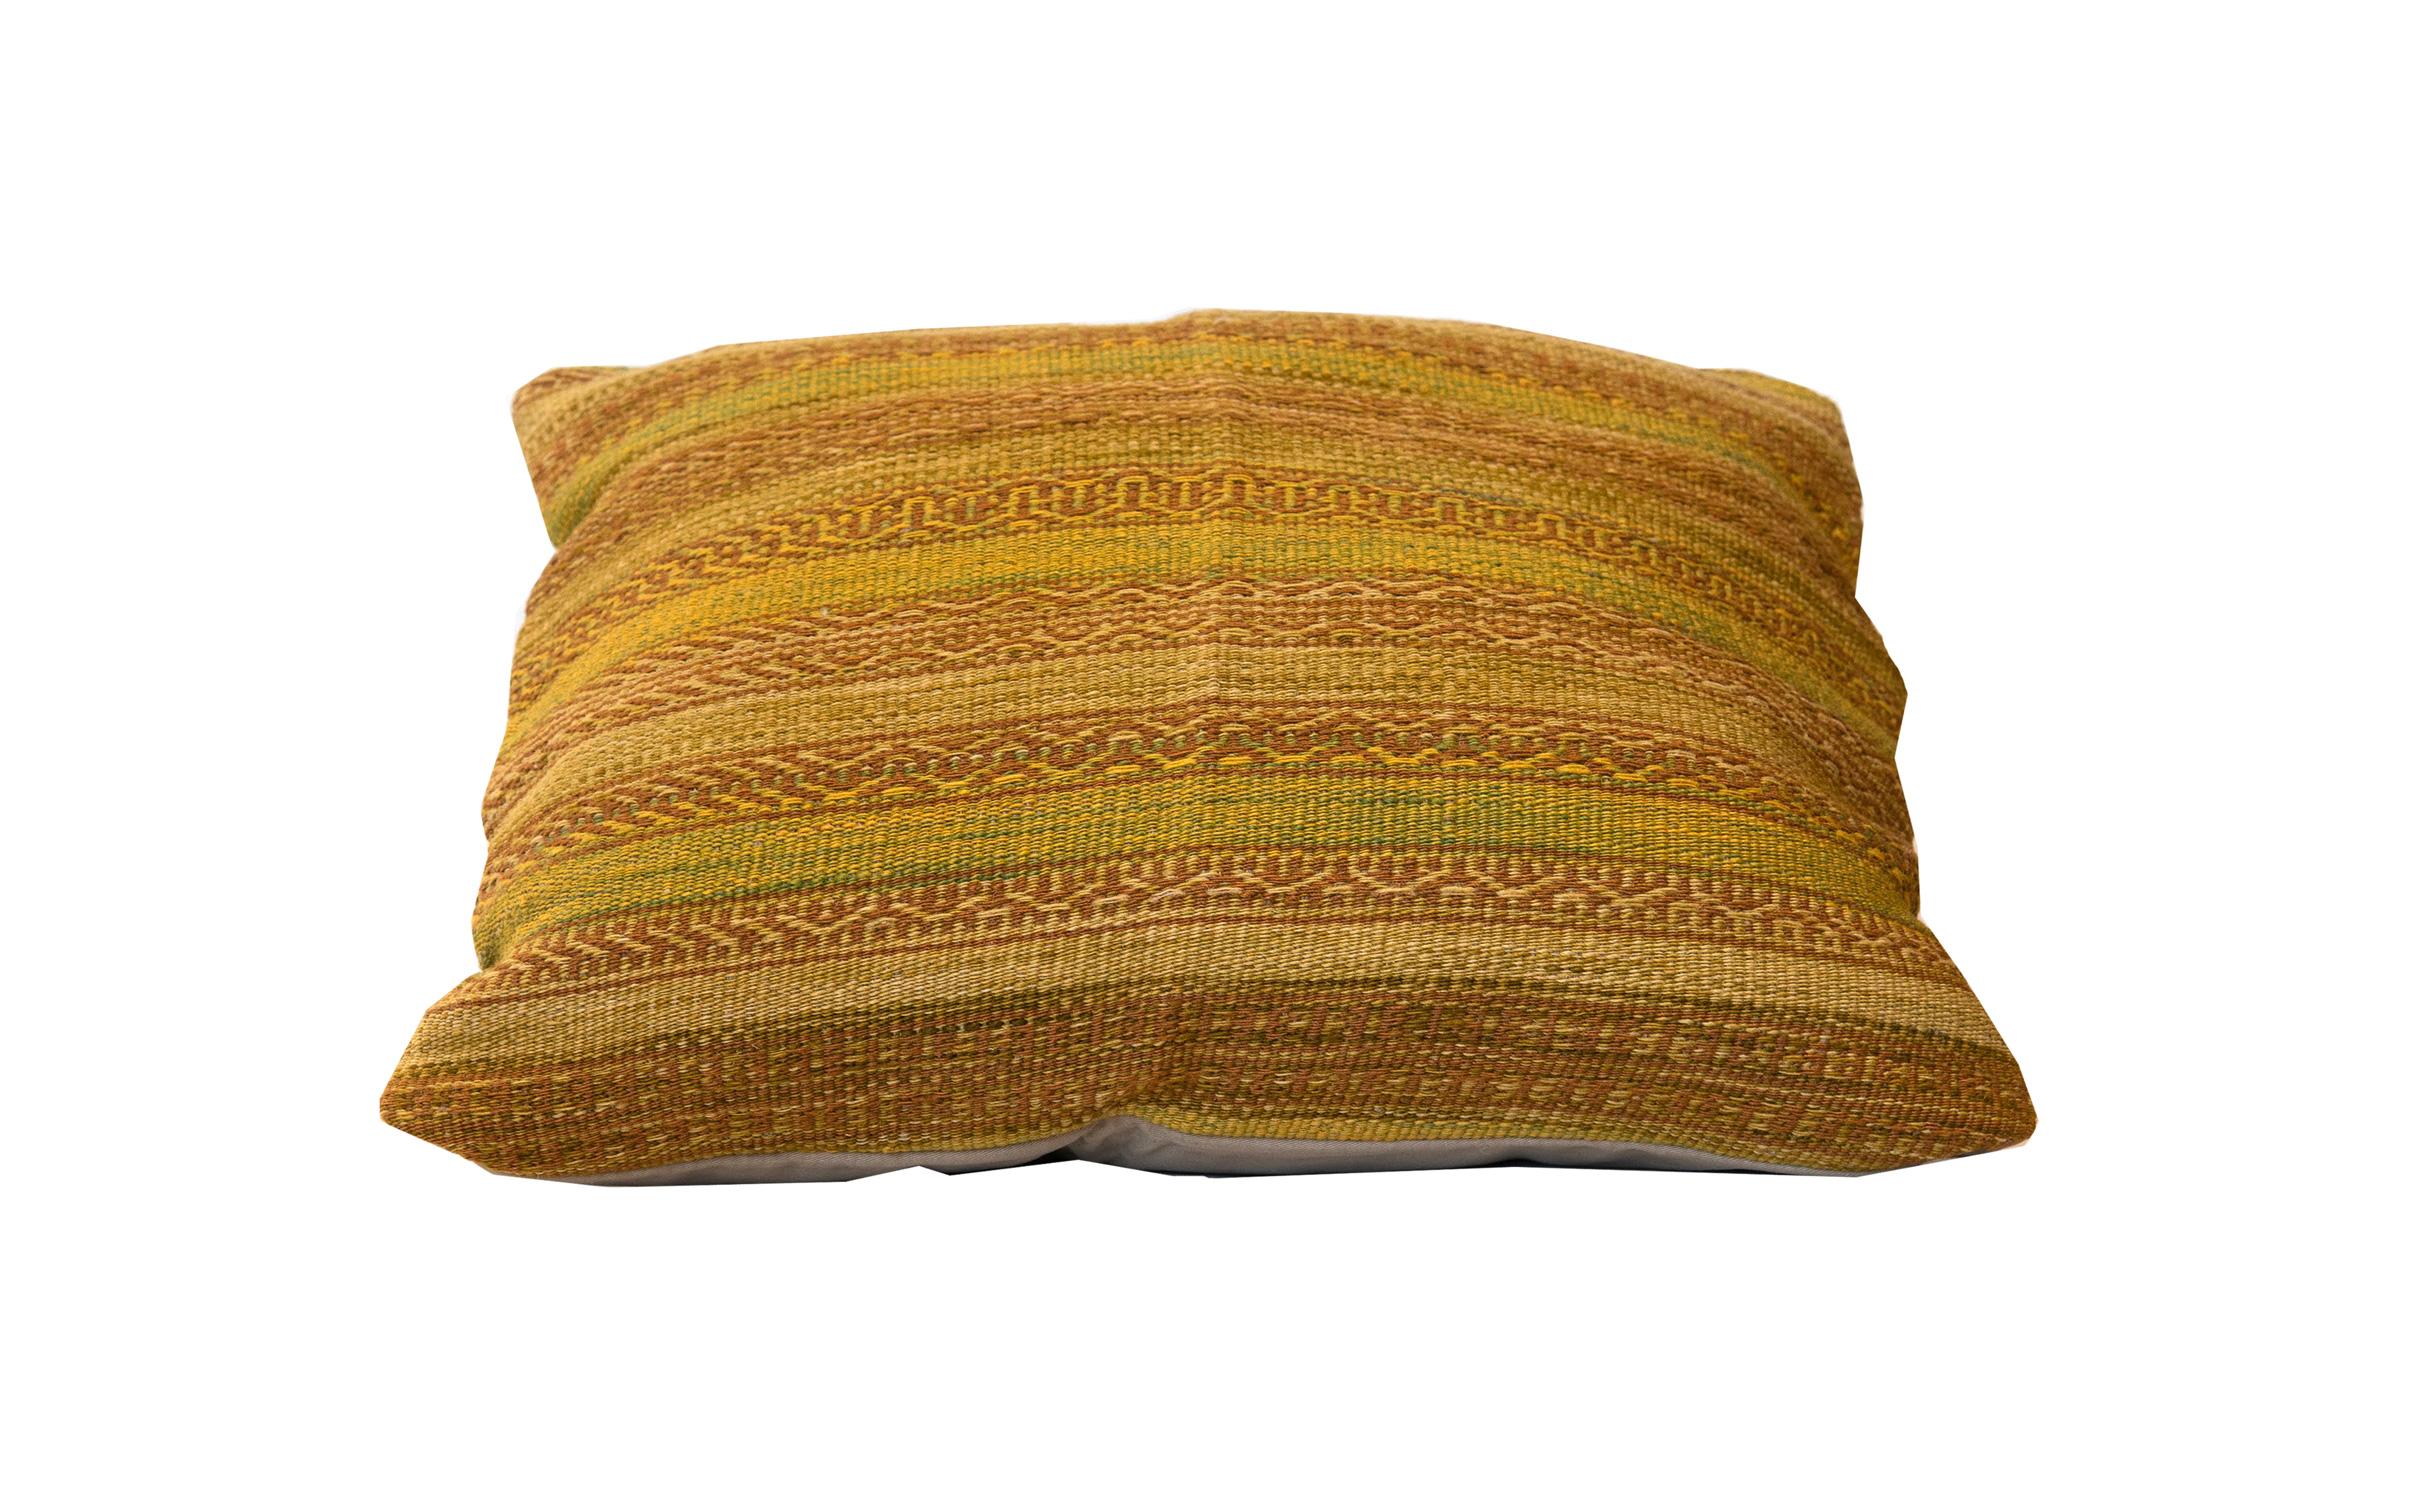 This fine wool cushion features a simple stripe design with various brown and cream stripes. They are woven intricately with geometric patterns through the strip. This unique cushion's colour, texture, and design are sure to make the perfect accent